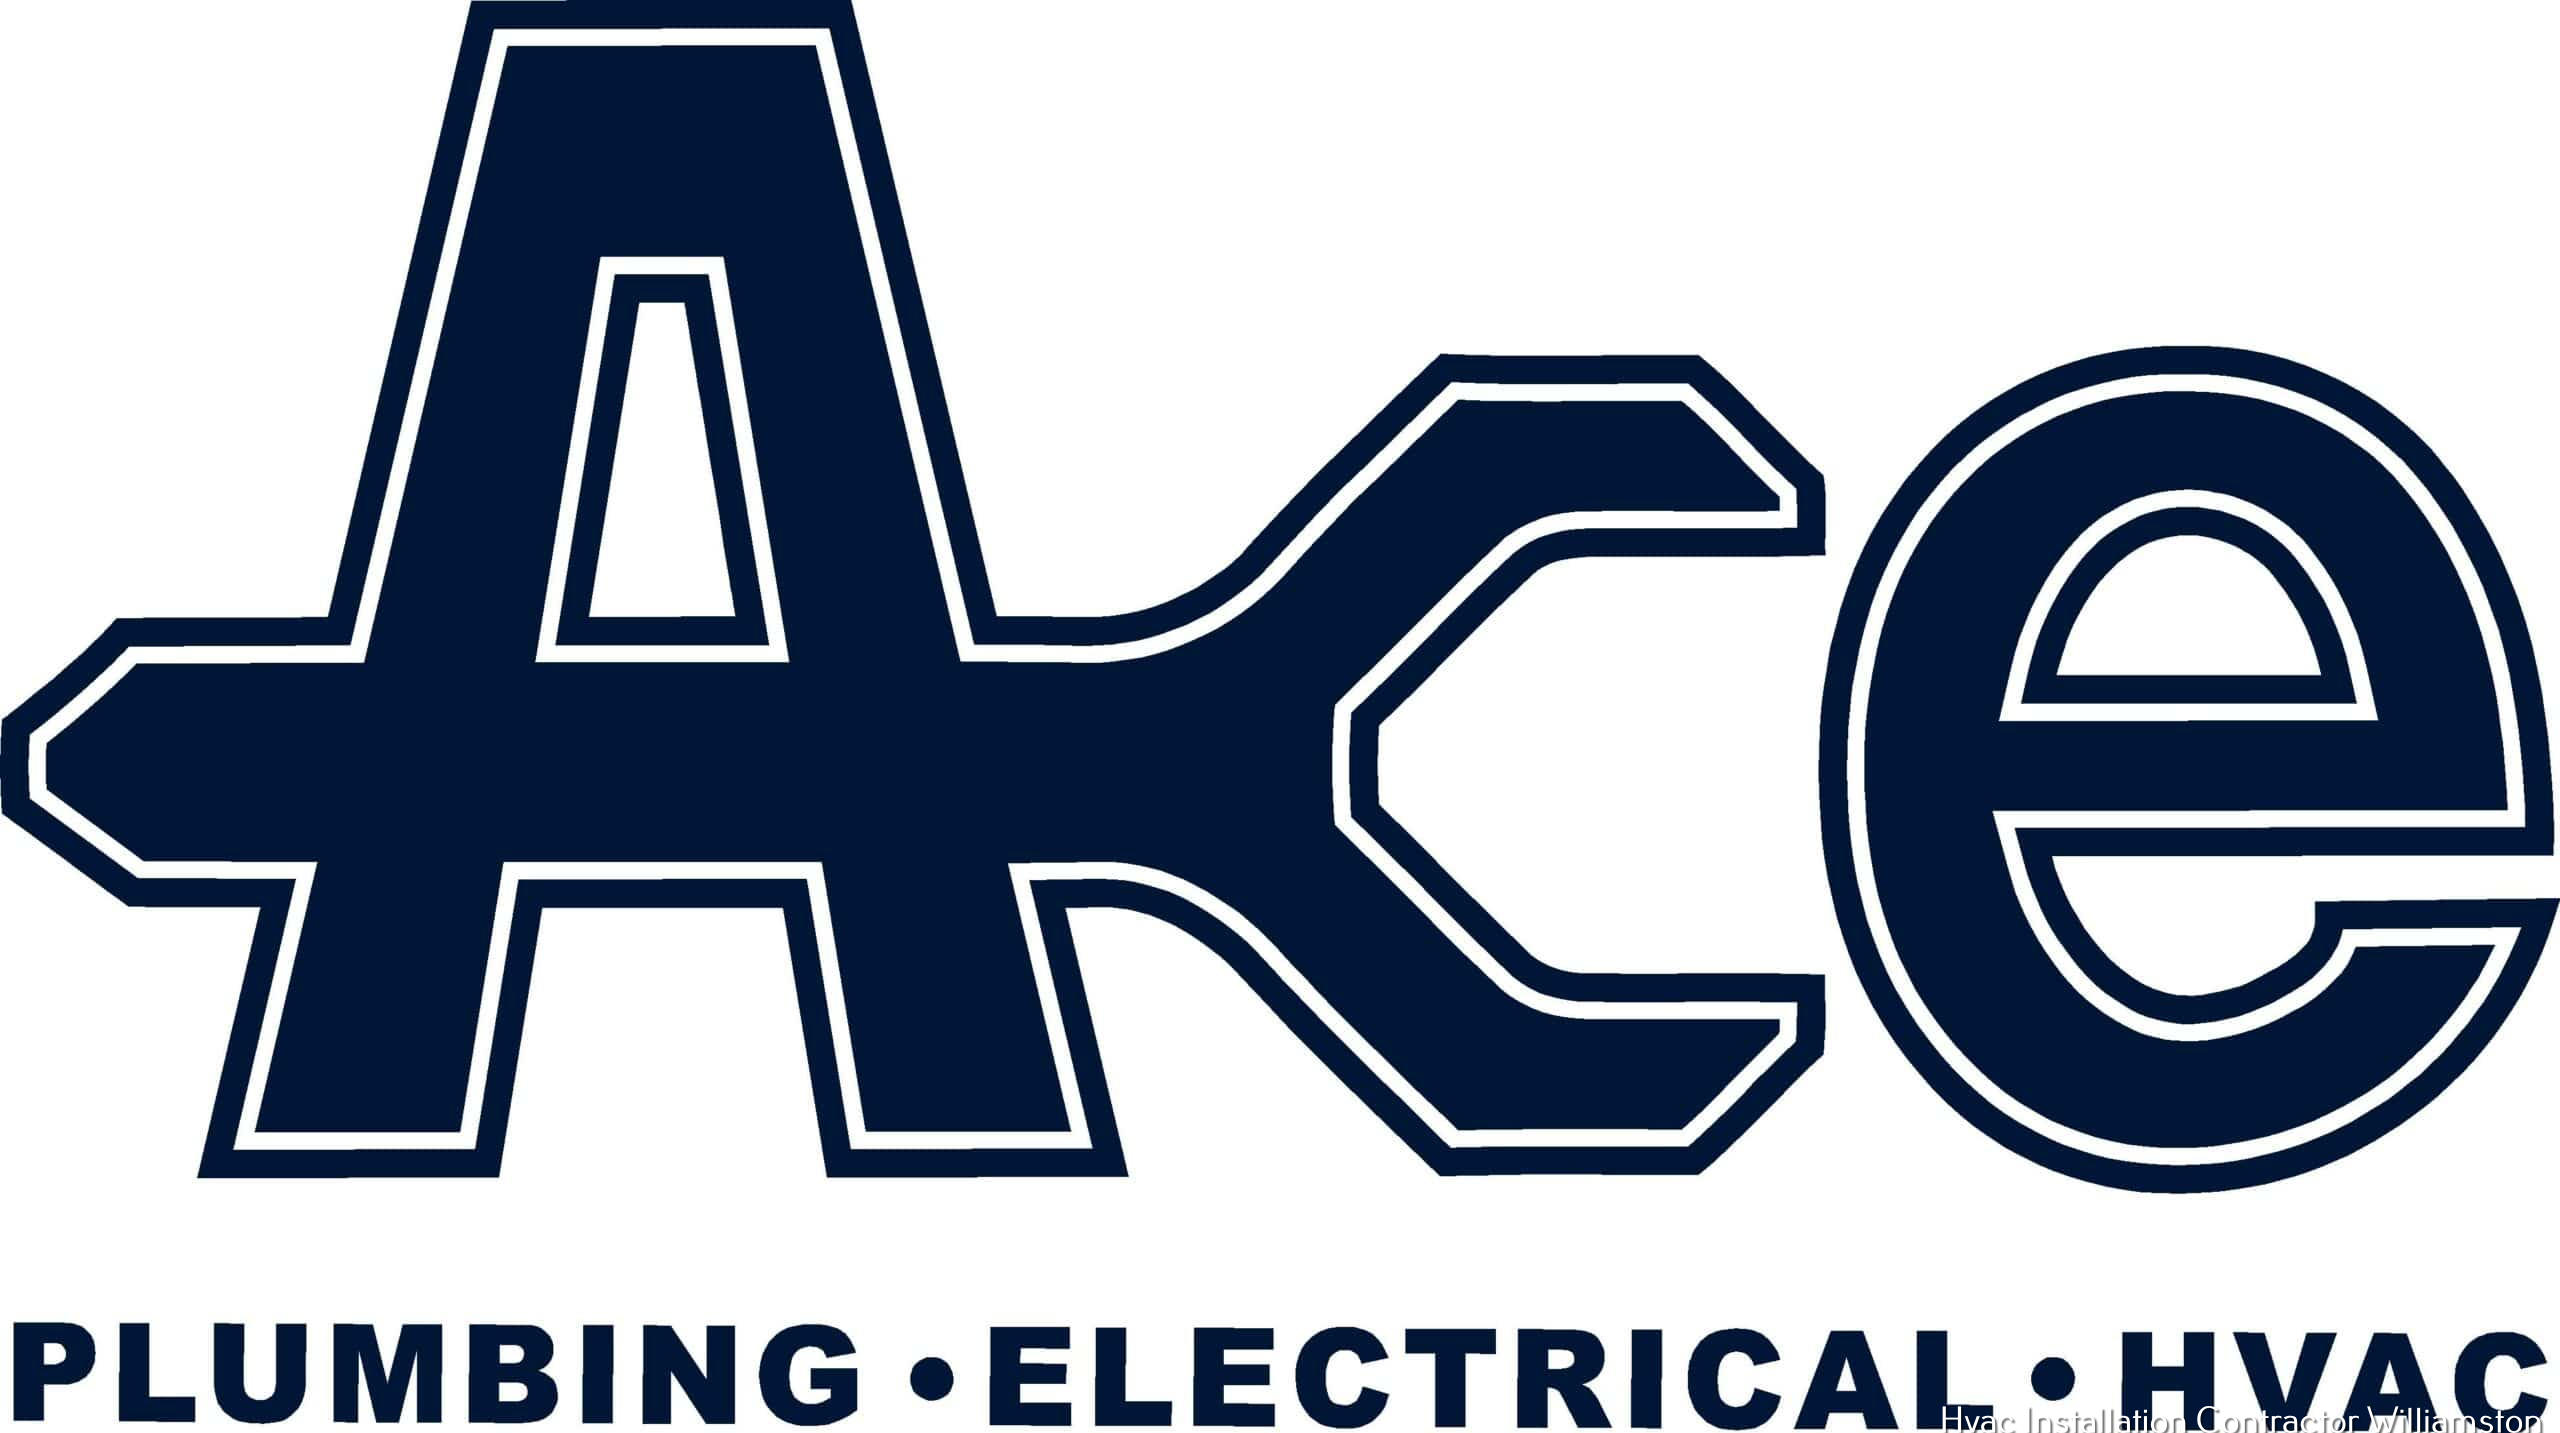 Ace Plumbing, Electric, Heating & Air Highlights HVAC Services